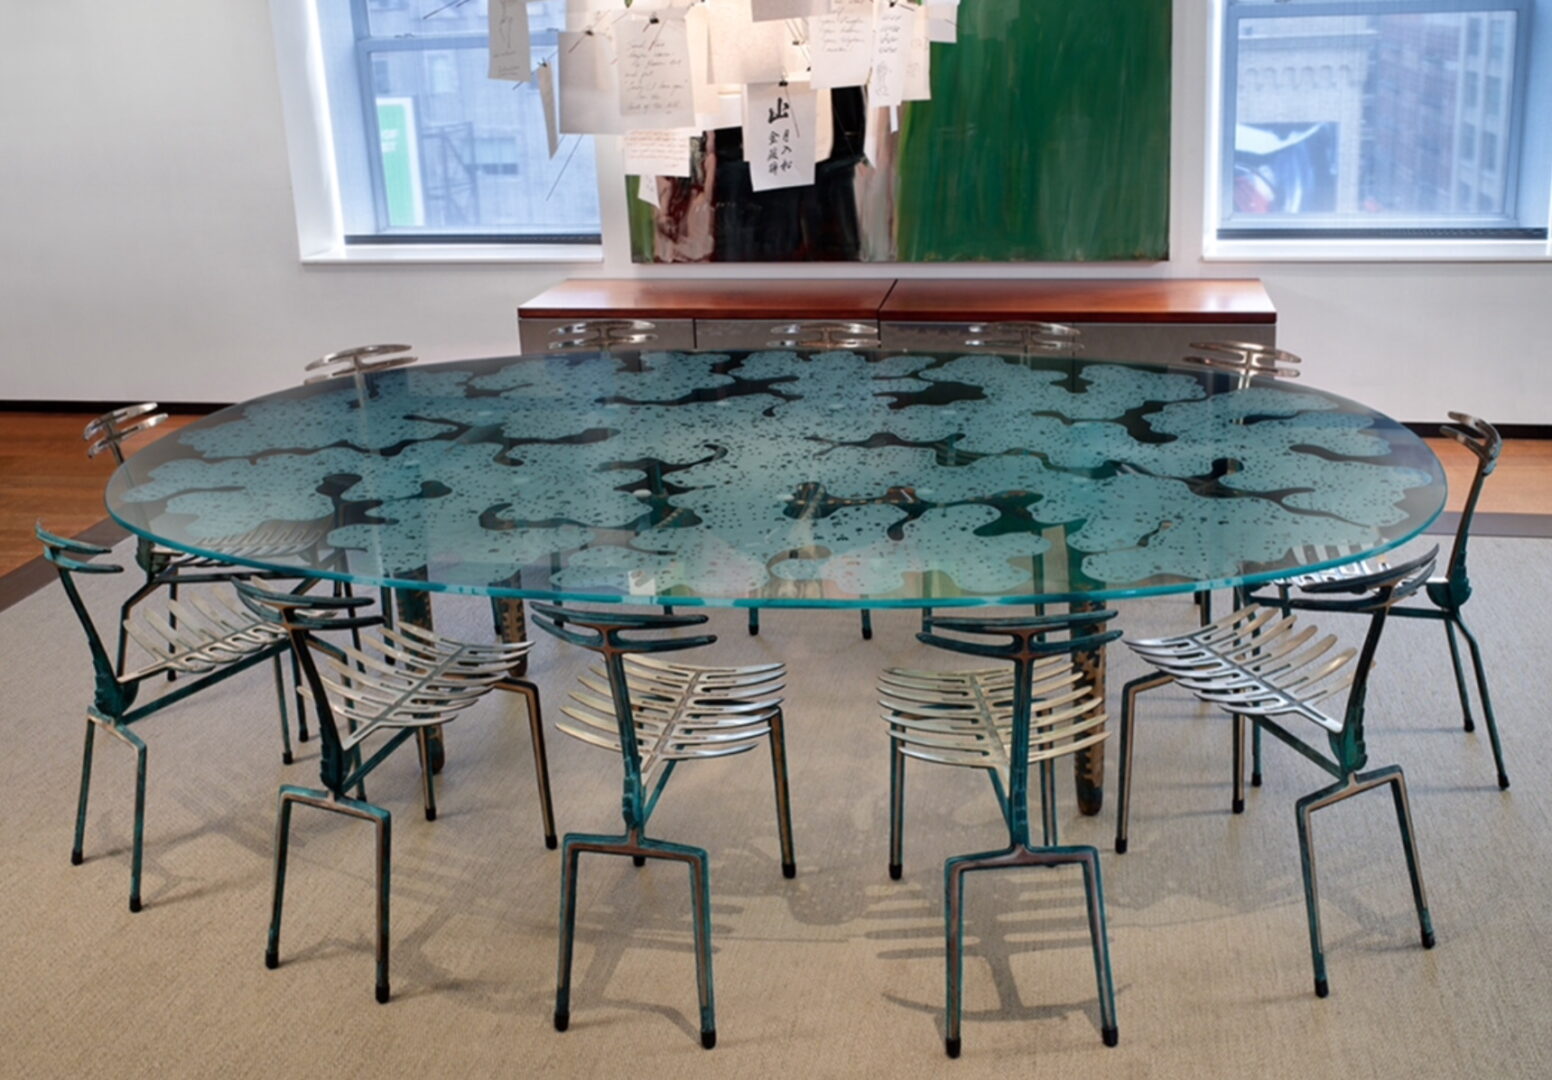 A large round glass table with chairs around it